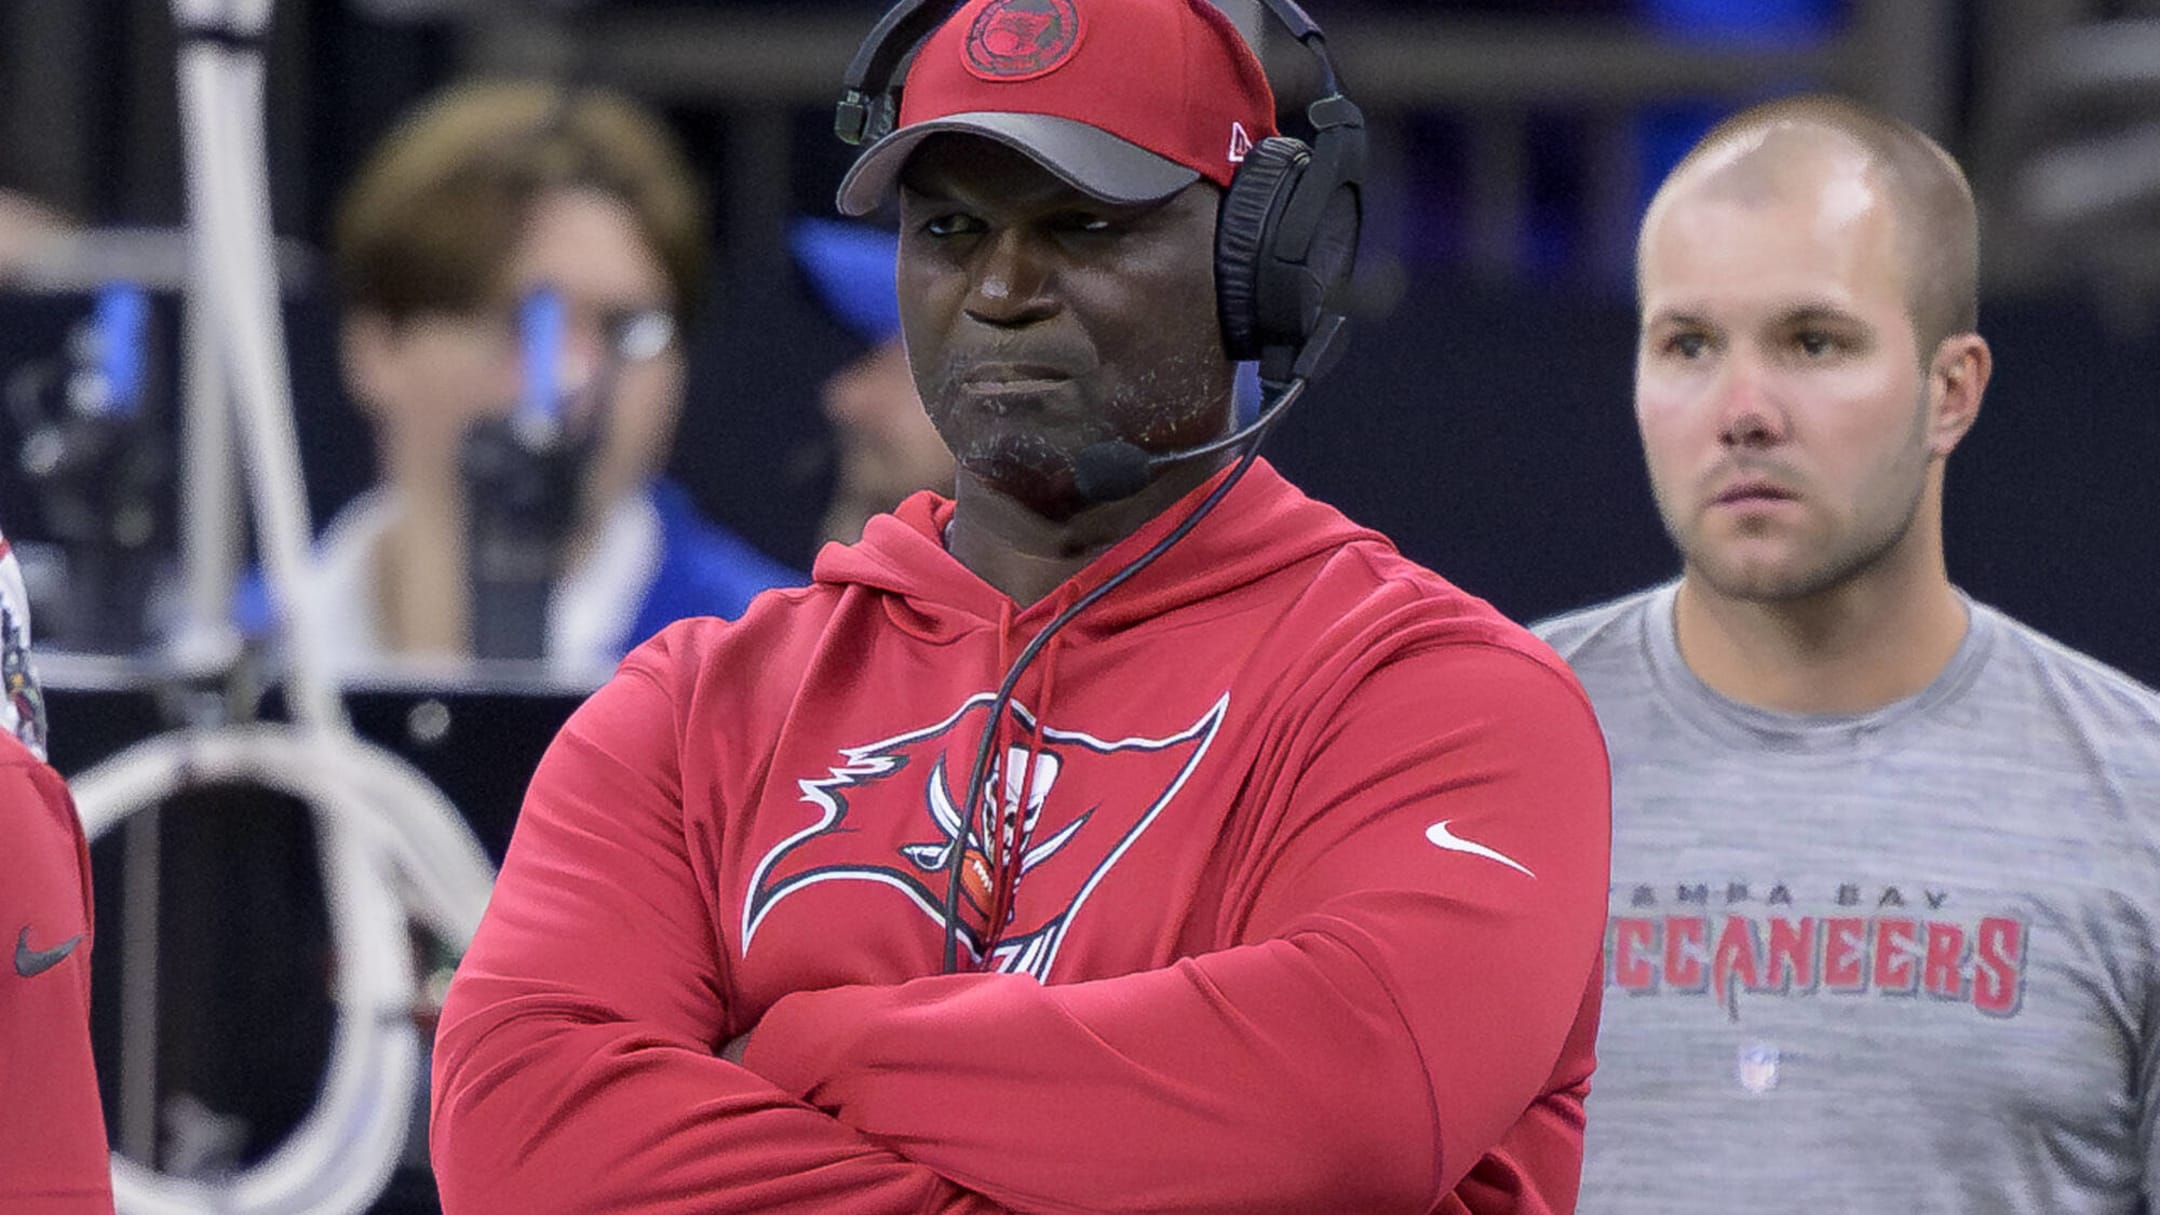 As those around him have come to learn, Bucs' Todd Bowles is tough to fool  - The Athletic